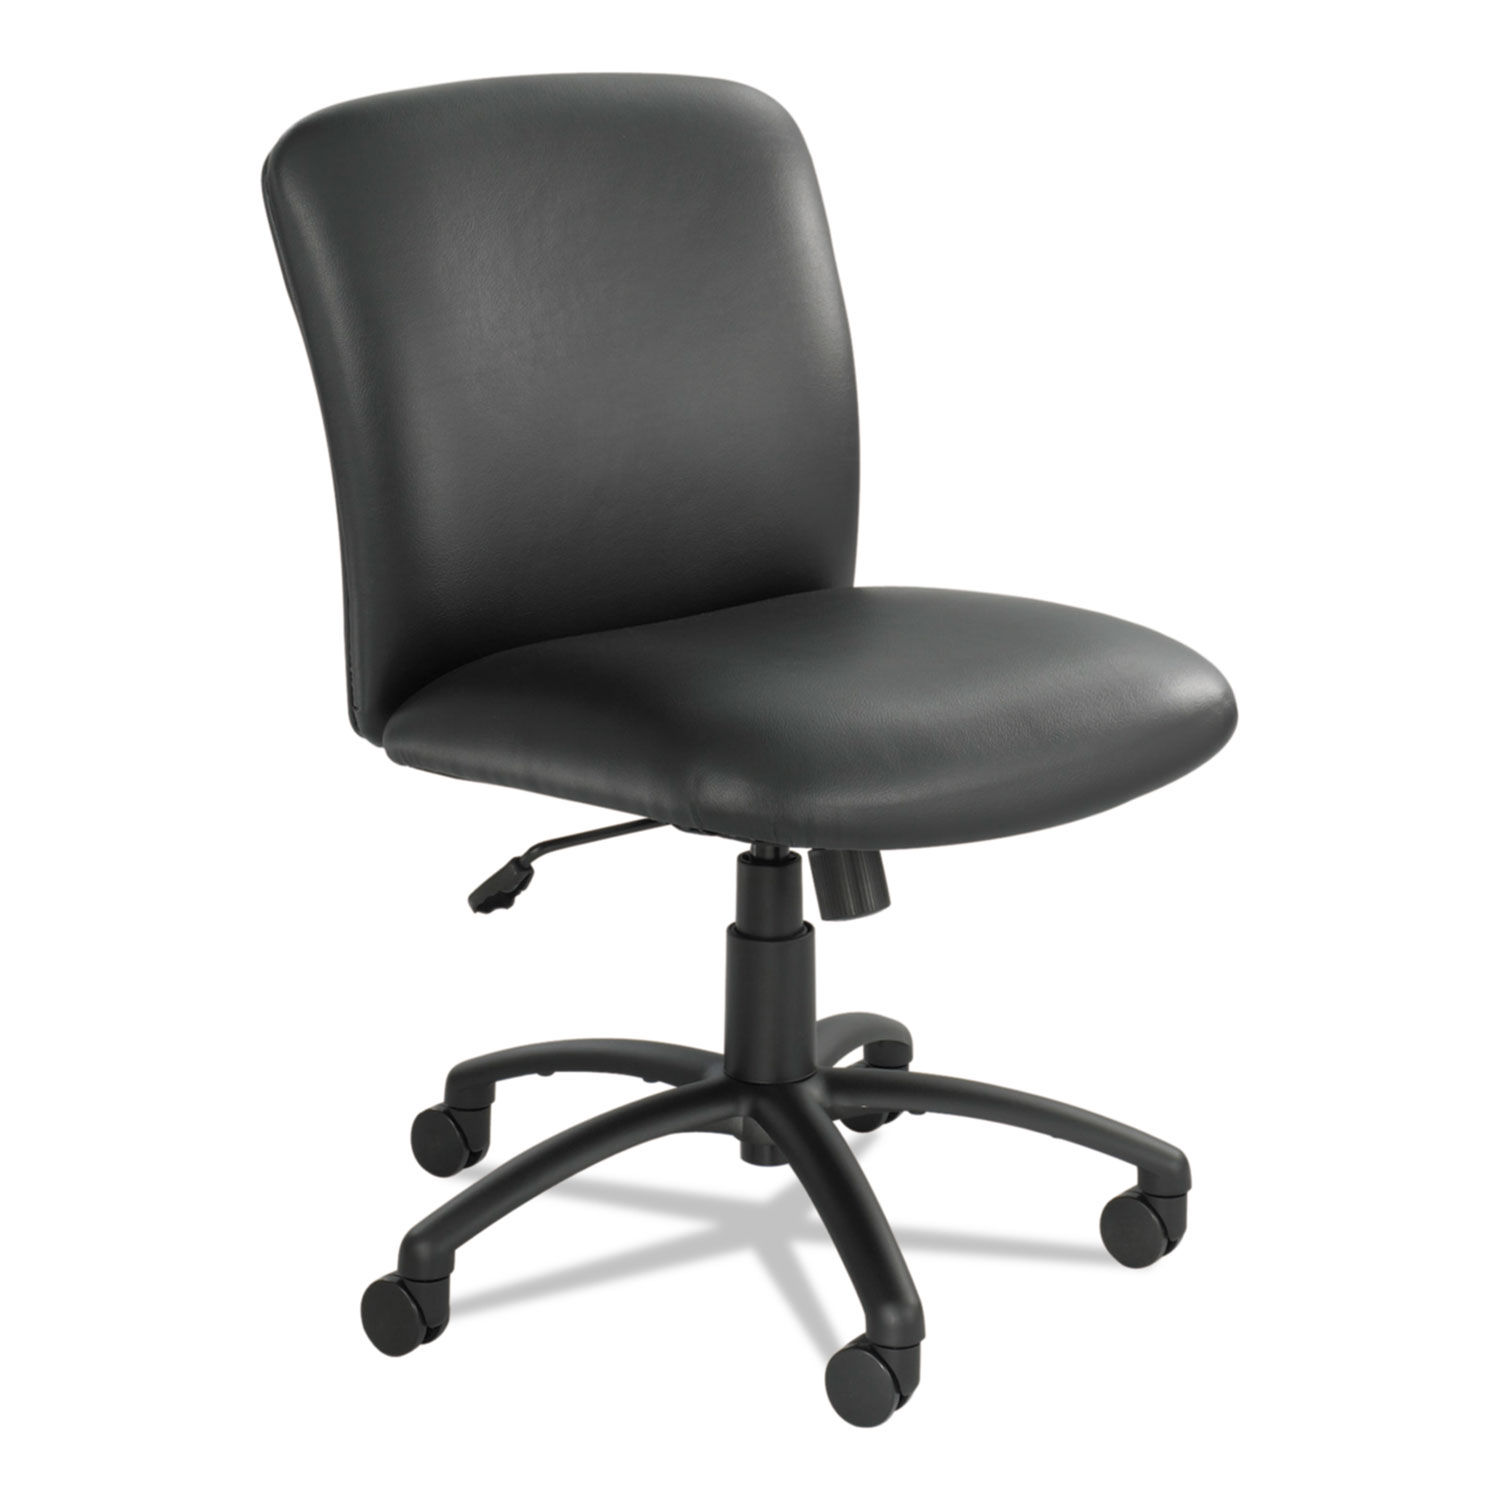 Uber Big/Tall Series Mid Back Chair Vinyl, Supports Up to 500 lb, 18.5" to 22.5" Seat Height, Black